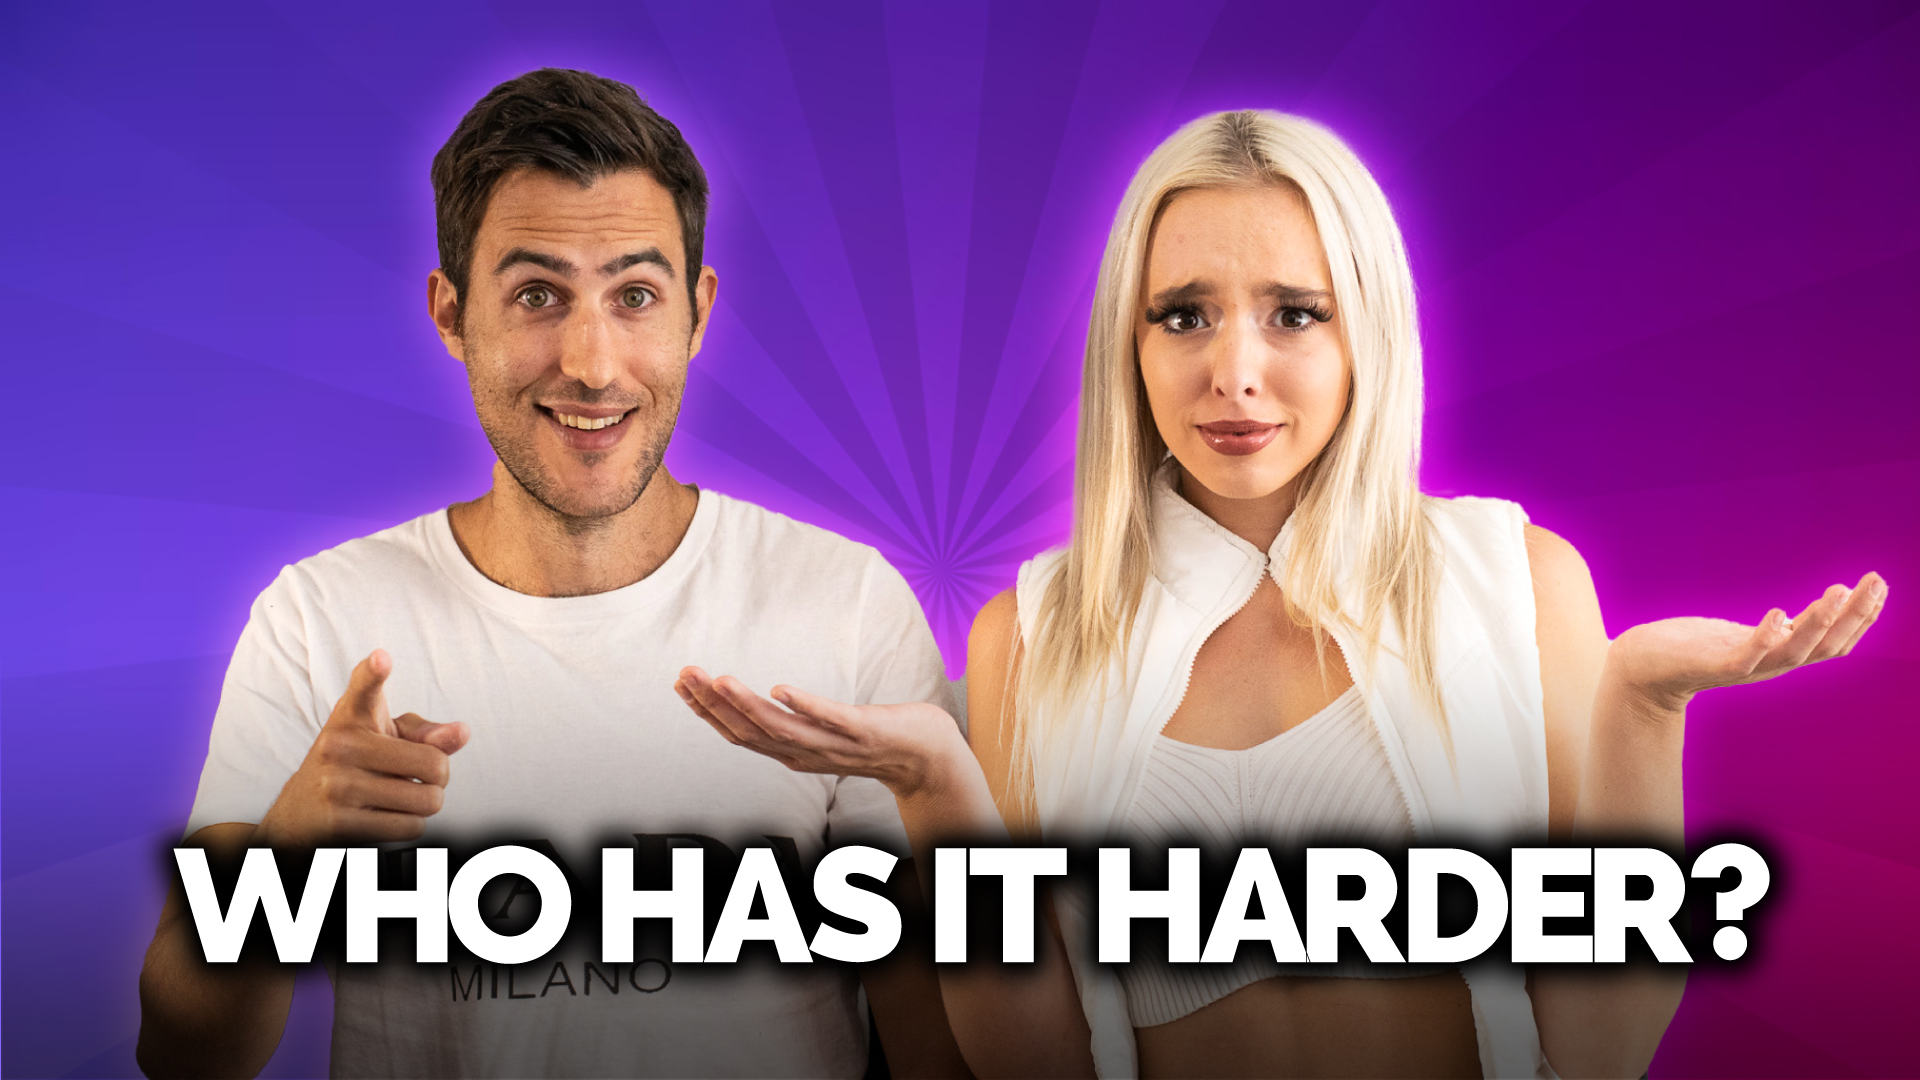 Is Dating Harder For Men Or Women? (THE TRUTH)